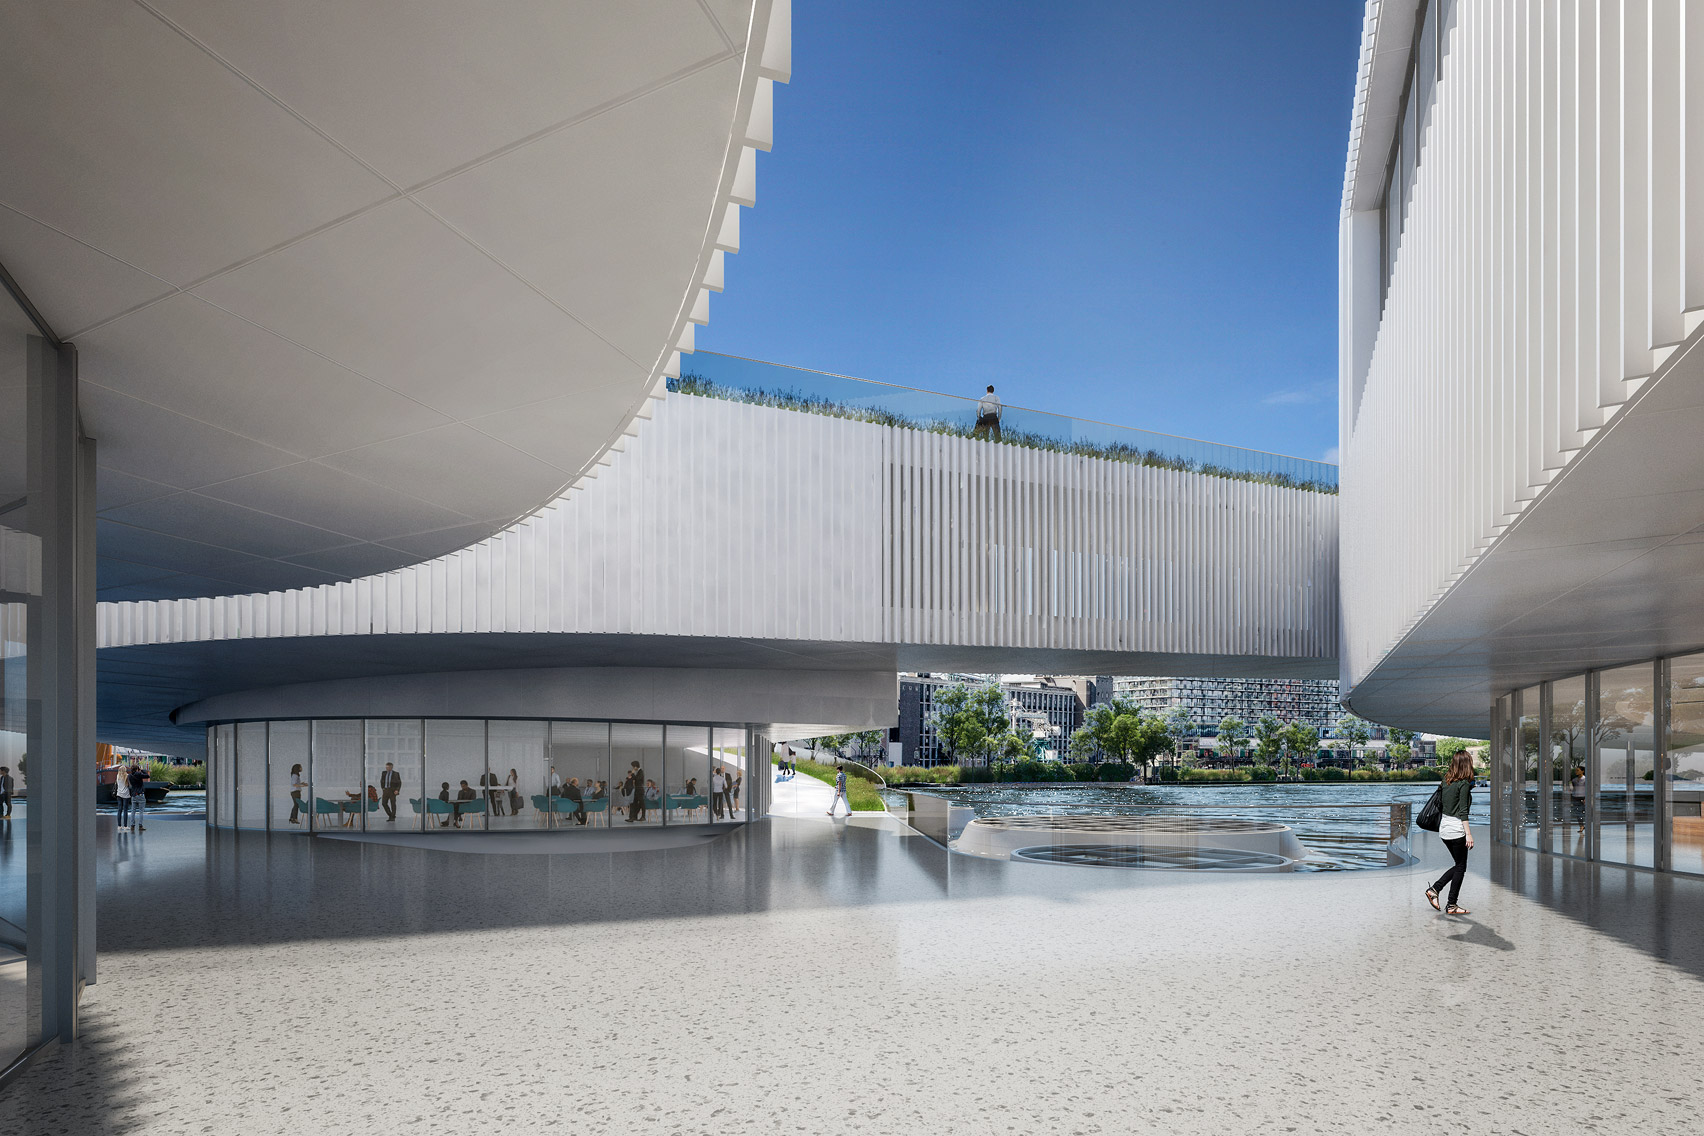 The centre of the Maritime Center Rotterdam by Mecanoo